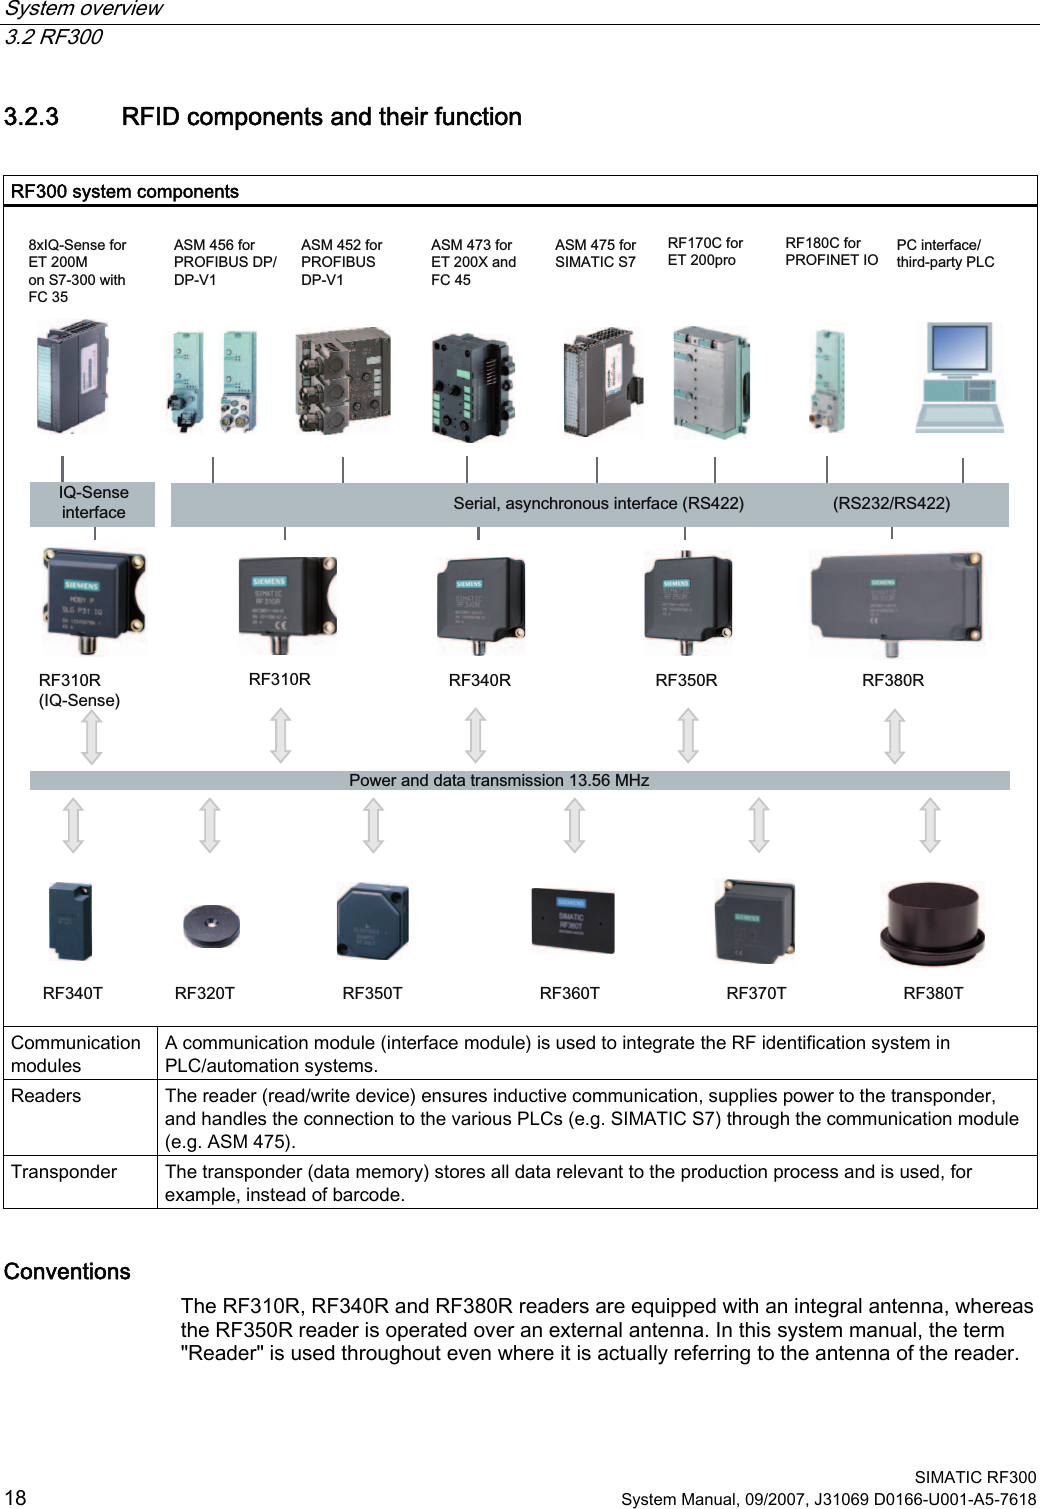 System overview   3.2 RF300  SIMATIC RF300 18 System Manual, 09/2007, J31069 D0166-U001-A5-7618 3.2.3 RFID components and their function  RF300 system components  6HULDODV\QFKURQRXVLQWHUIDFH565)7 5)73RZHUDQGGDWDWUDQVPLVVLRQ0+]5)5,46HQVH[,46HQVHIRU(70RQ6ZLWK)&amp;3&amp;LQWHUIDFHWKLUGSDUW\3/&amp;$60IRU6,0$7,&amp;65)&amp;IRU(7SUR$60IRU(7;DQG)&amp;$60IRU352),%86&apos;395)7 5)7 5)7 5)75)5 5)5 5)5$60bIRU352),%86&apos;3&apos;39,46HQVHLQWHUIDFH5)556565)&amp;IRU352),1(7,2  Communication modules A communication module (interface module) is used to integrate the RF identification system in PLC/automation systems. Readers  The reader (read/write device) ensures inductive communication, supplies power to the transponder, and handles the connection to the various PLCs (e.g. SIMATIC S7) through the communication module (e.g. ASM 475). Transponder  The transponder (data memory) stores all data relevant to the production process and is used, for example, instead of barcode. Conventions The RF310R, RF340R and RF380R readers are equipped with an integral antenna, whereas the RF350R reader is operated over an external antenna. In this system manual, the term &quot;Reader&quot; is used throughout even where it is actually referring to the antenna of the reader. 